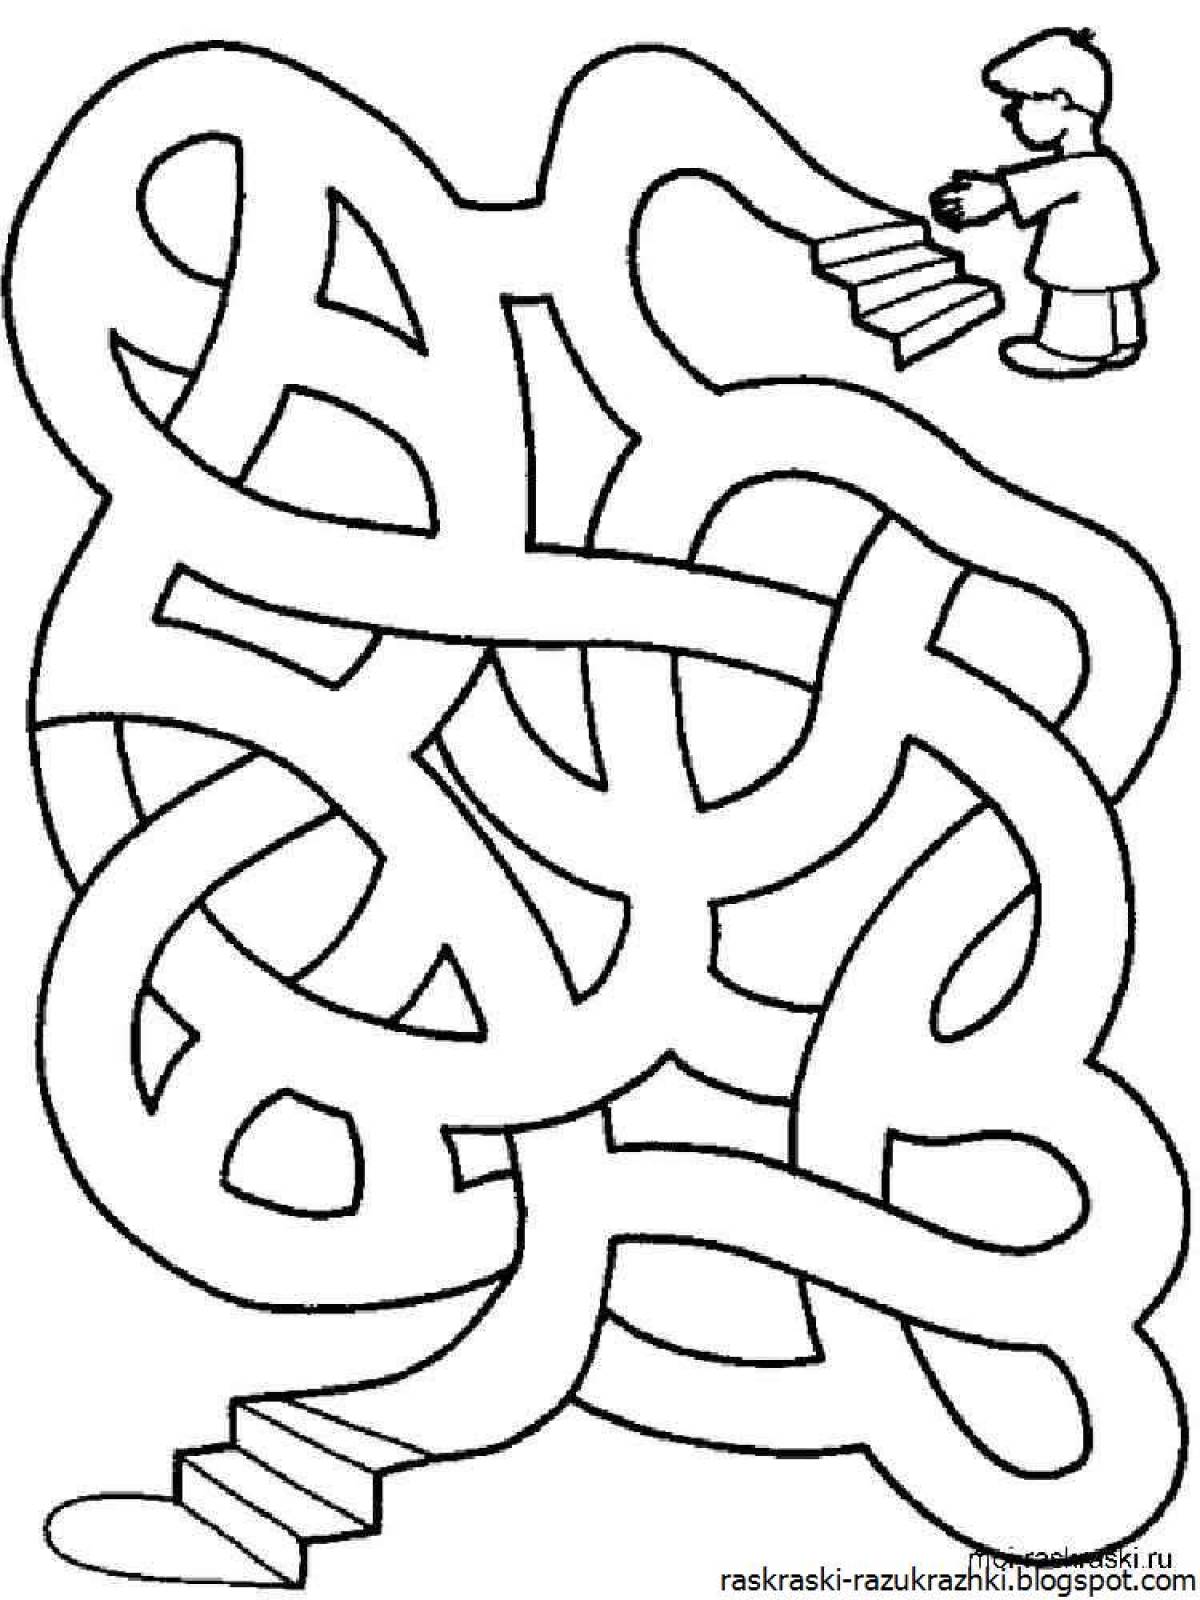 Glowing maze coloring page